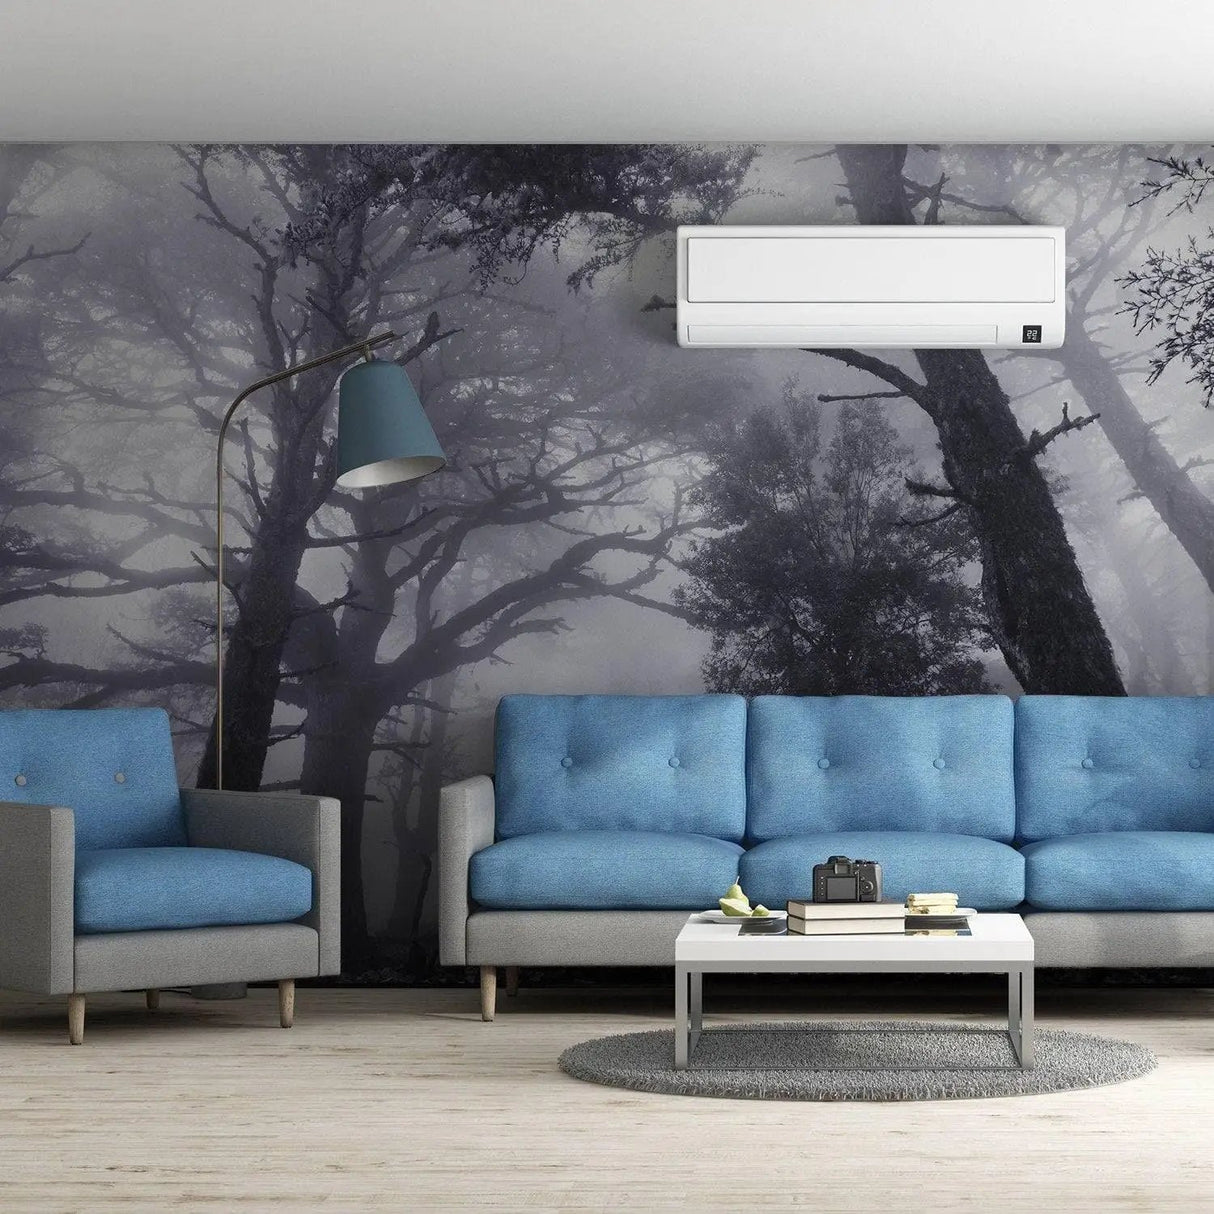 Foggy Forest Decal Wallpaper - Fog Tree Removable Wall Paper Sticker Mural Art - Large Bedroom Dark Misty Nature Decor Peel And Stick - Decords